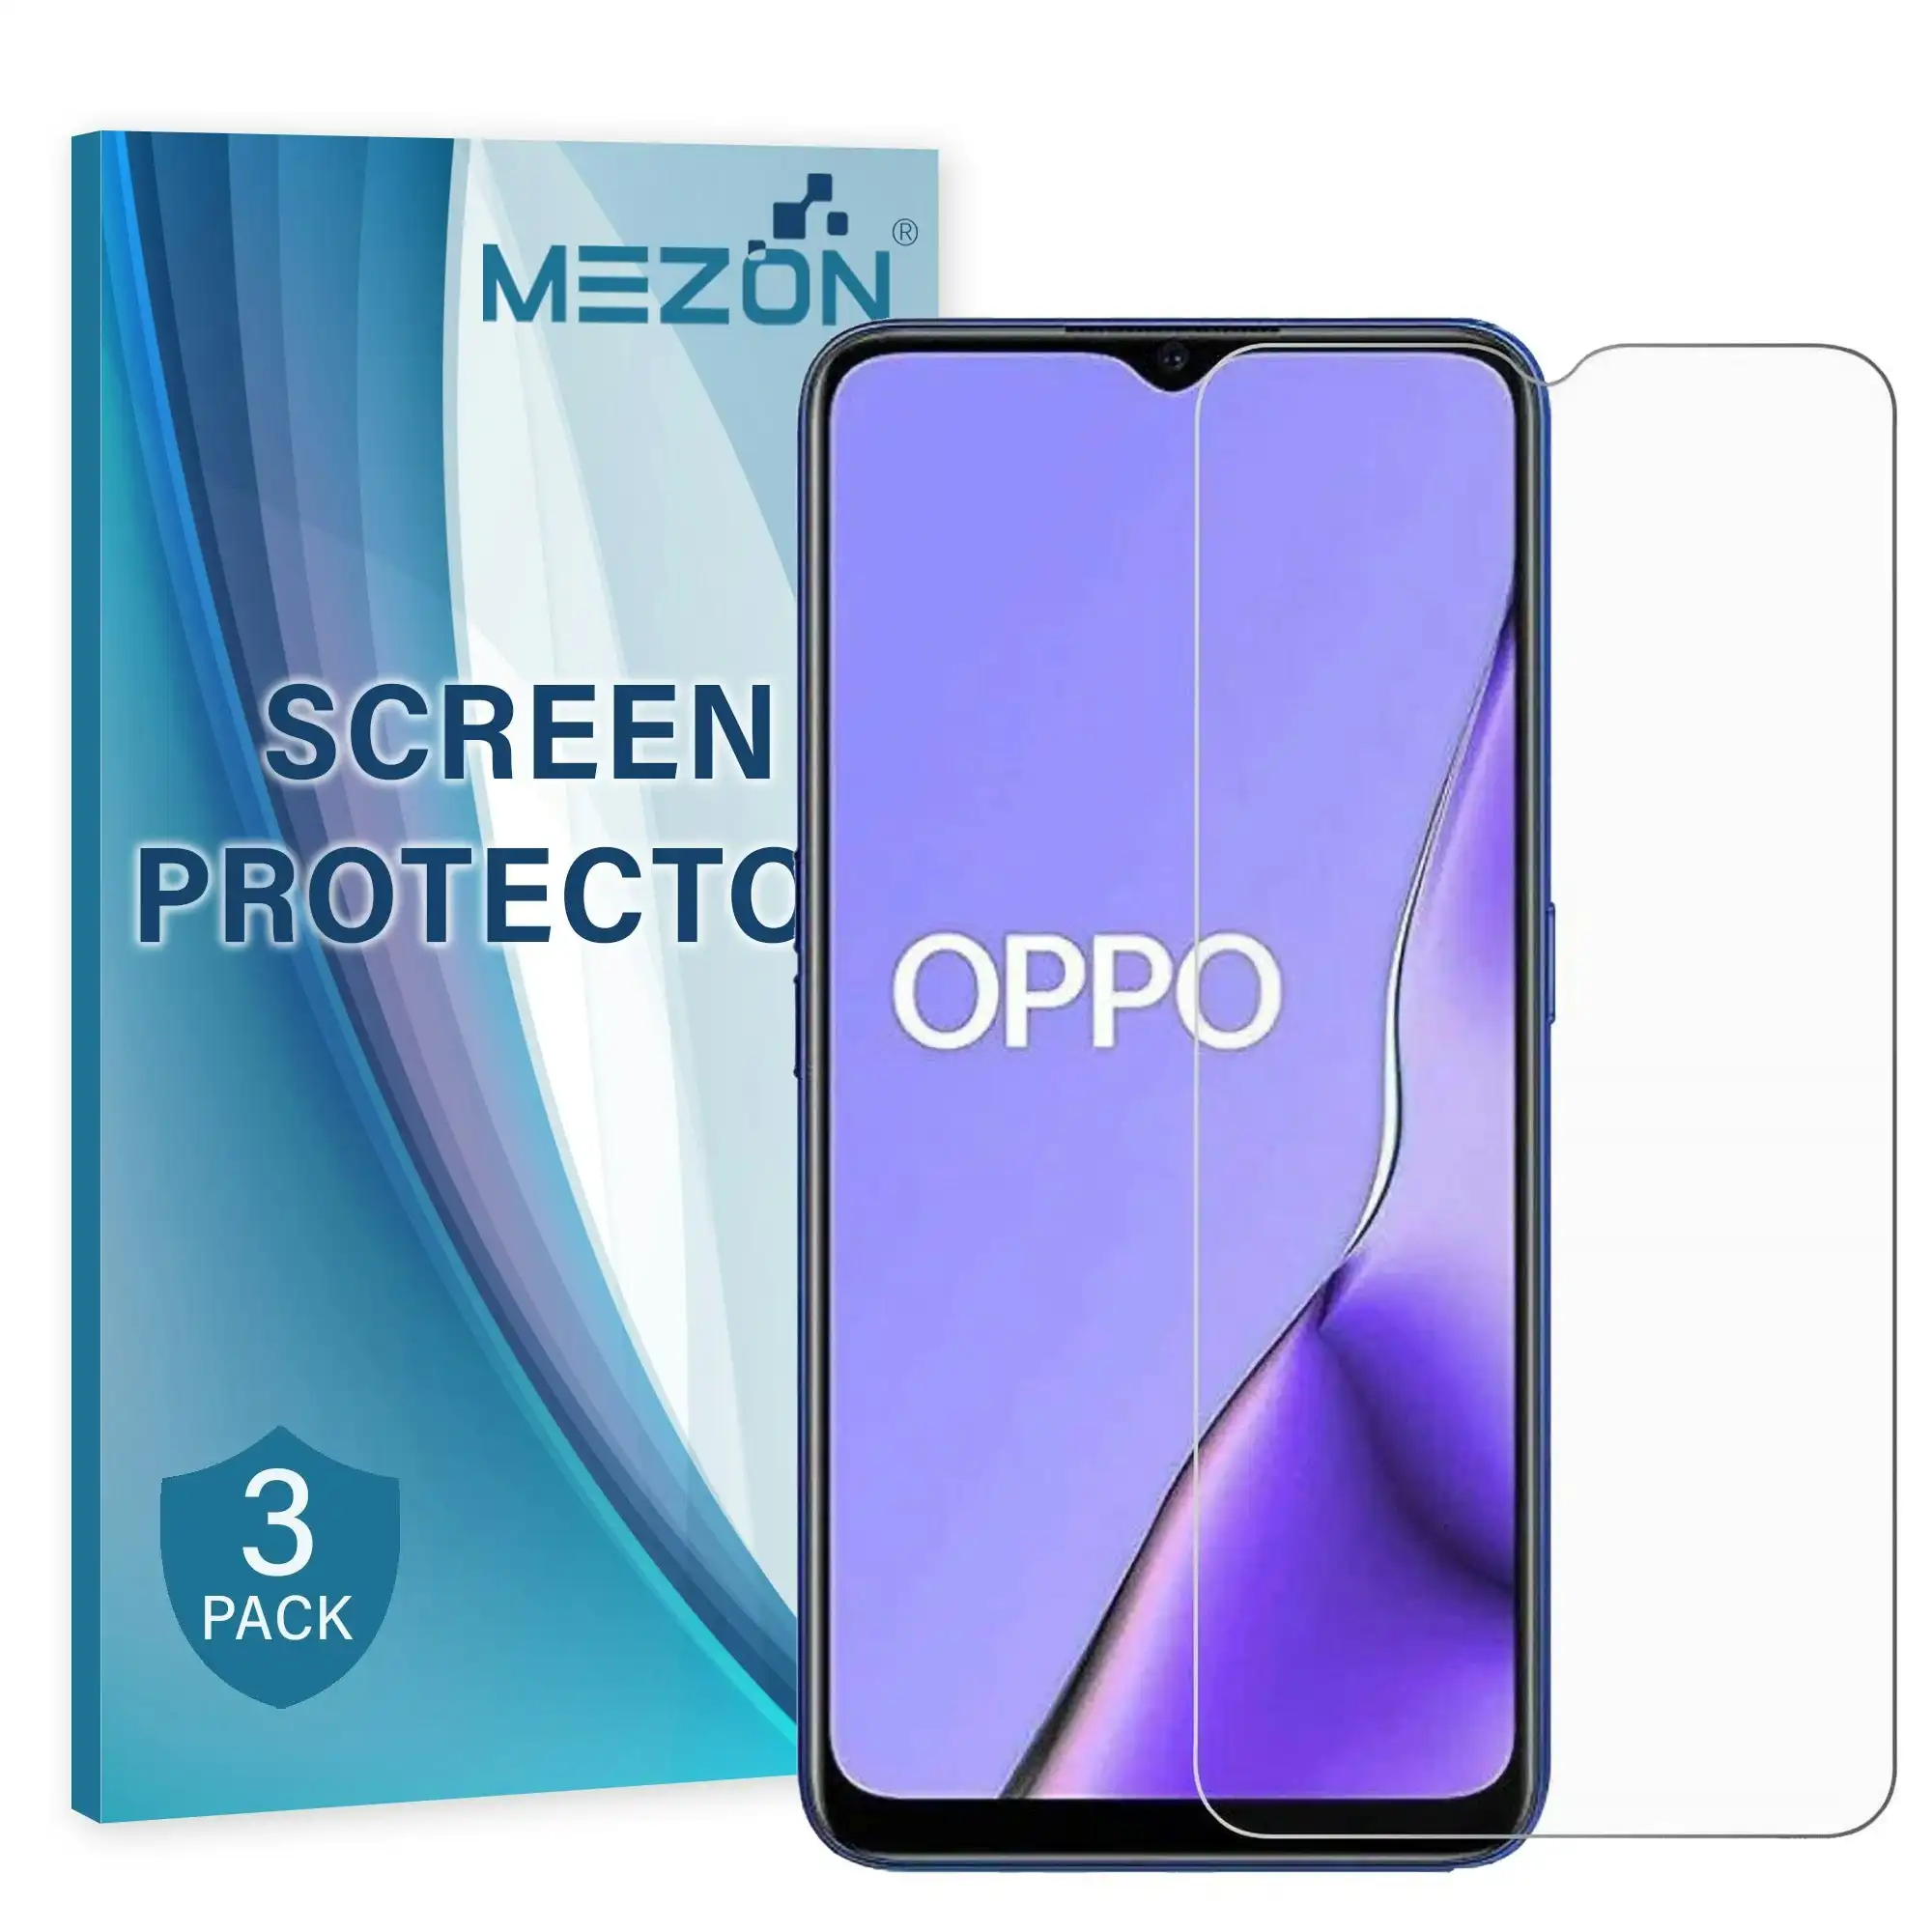 [3 Pack] MEZON OPPO A9 2020 Ultra Clear Screen Protector Case Friendly Film (A9 2020, Clear)